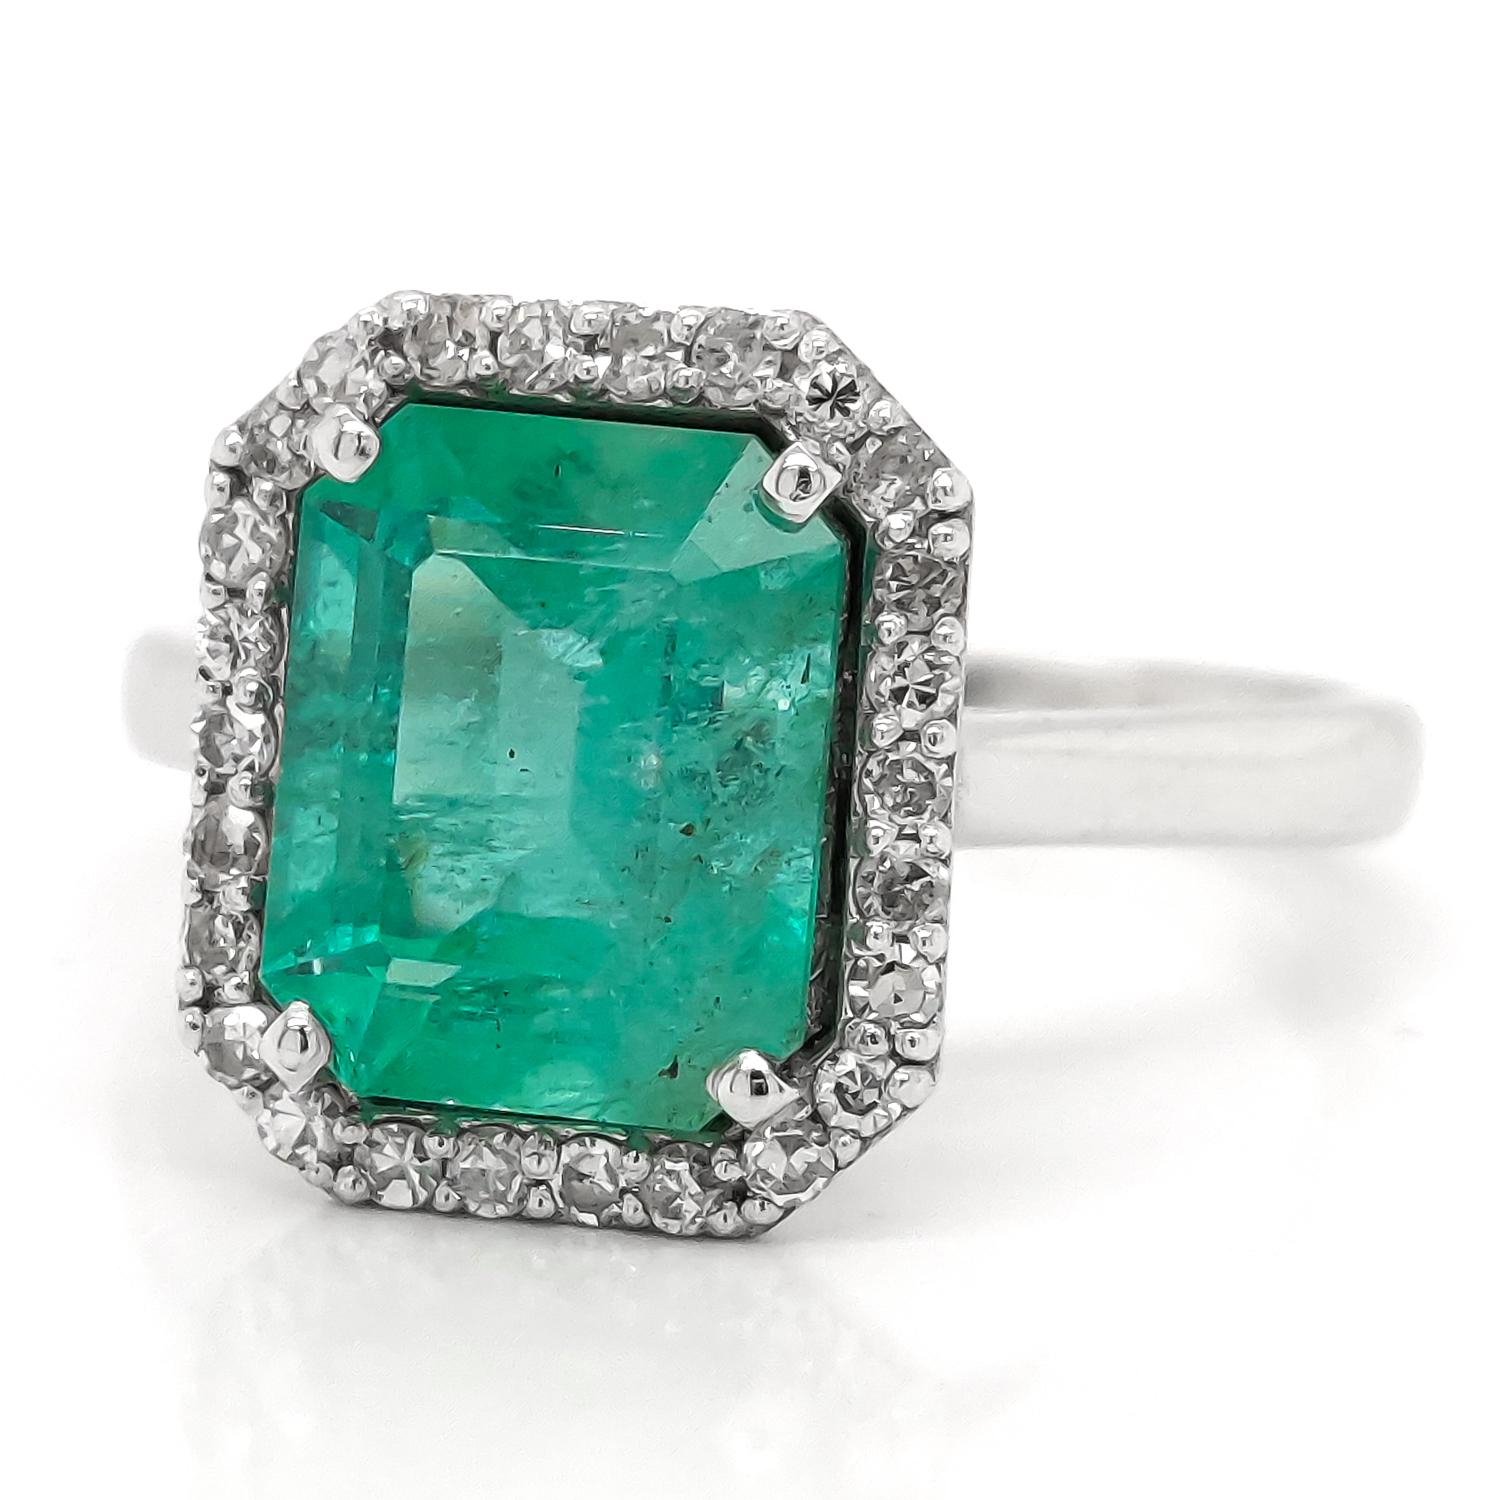 This Gorgeous emerald ring illuminates pure class and elegance with its mesmerizing 2.49ct green emerald, surrounded with breathtakingly sparkly 26-round brilliant diamonds all set in 18kt white gold. This amazing piece of jewelry will immediately